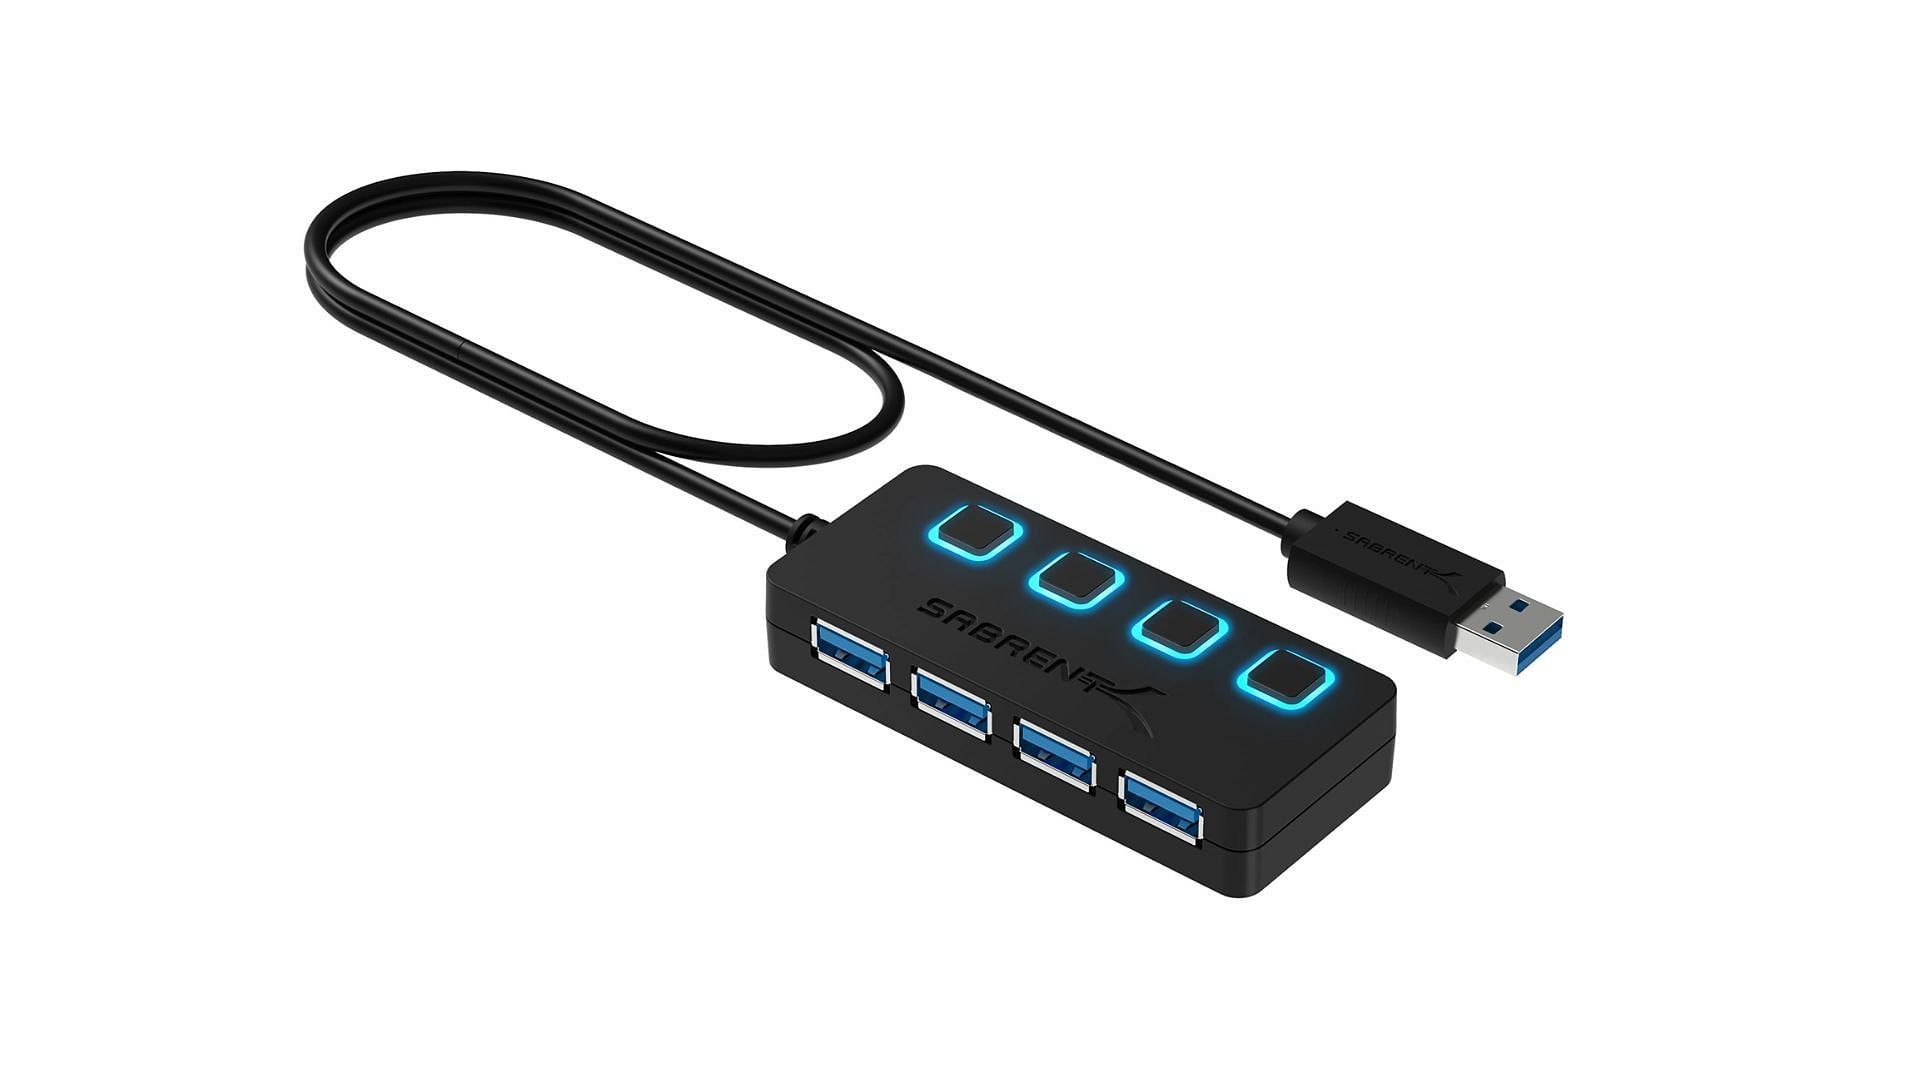 USB hubs can be used to connect additional accessories (Image via Amazon/Sabrent)